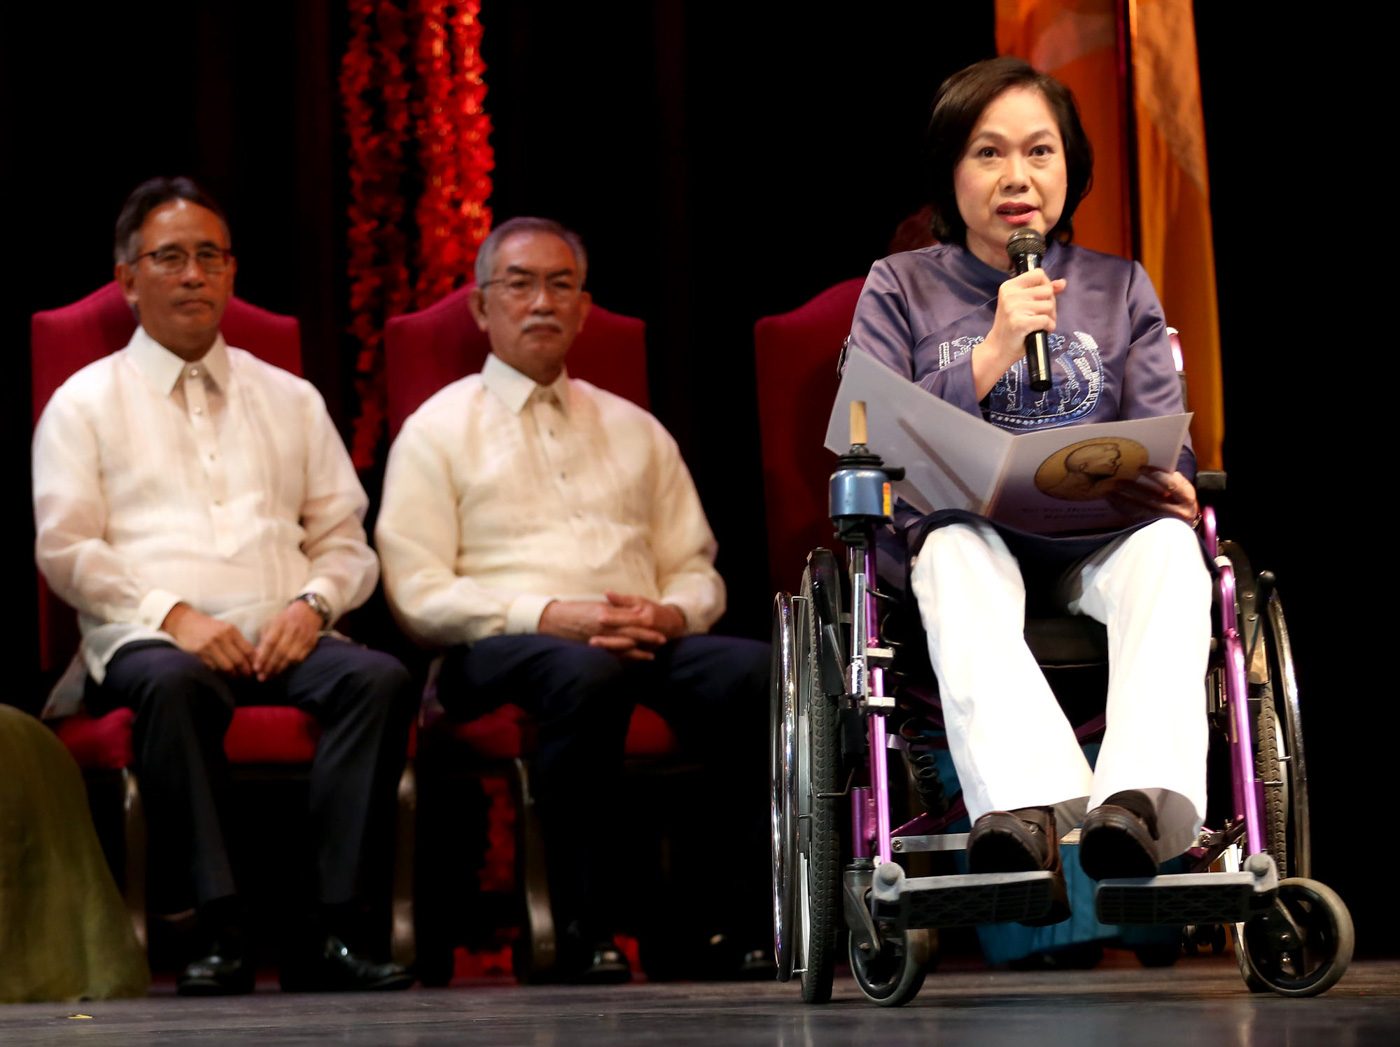 ‘Change the world by being better persons’ – Magsaysay Awardee Vo Thi Hoang Yen